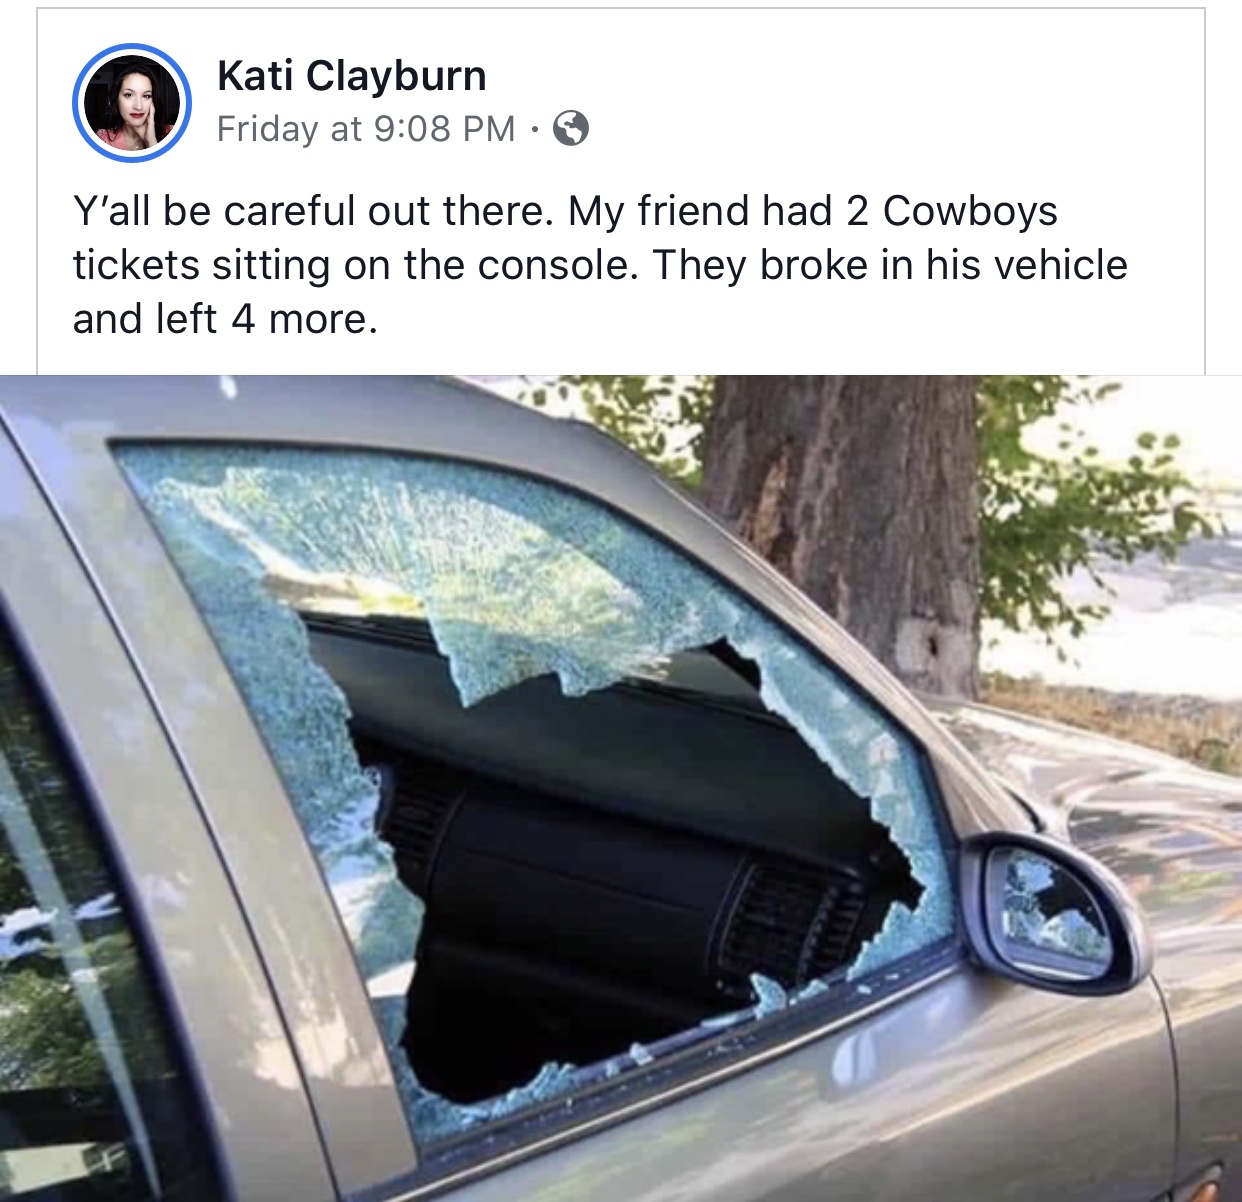 car break - Kati Clayburn Friday at 3 Y'all be careful out there. My friend had 2 Cowboys tickets sitting on the console. They broke in his vehicle and left 4 more.